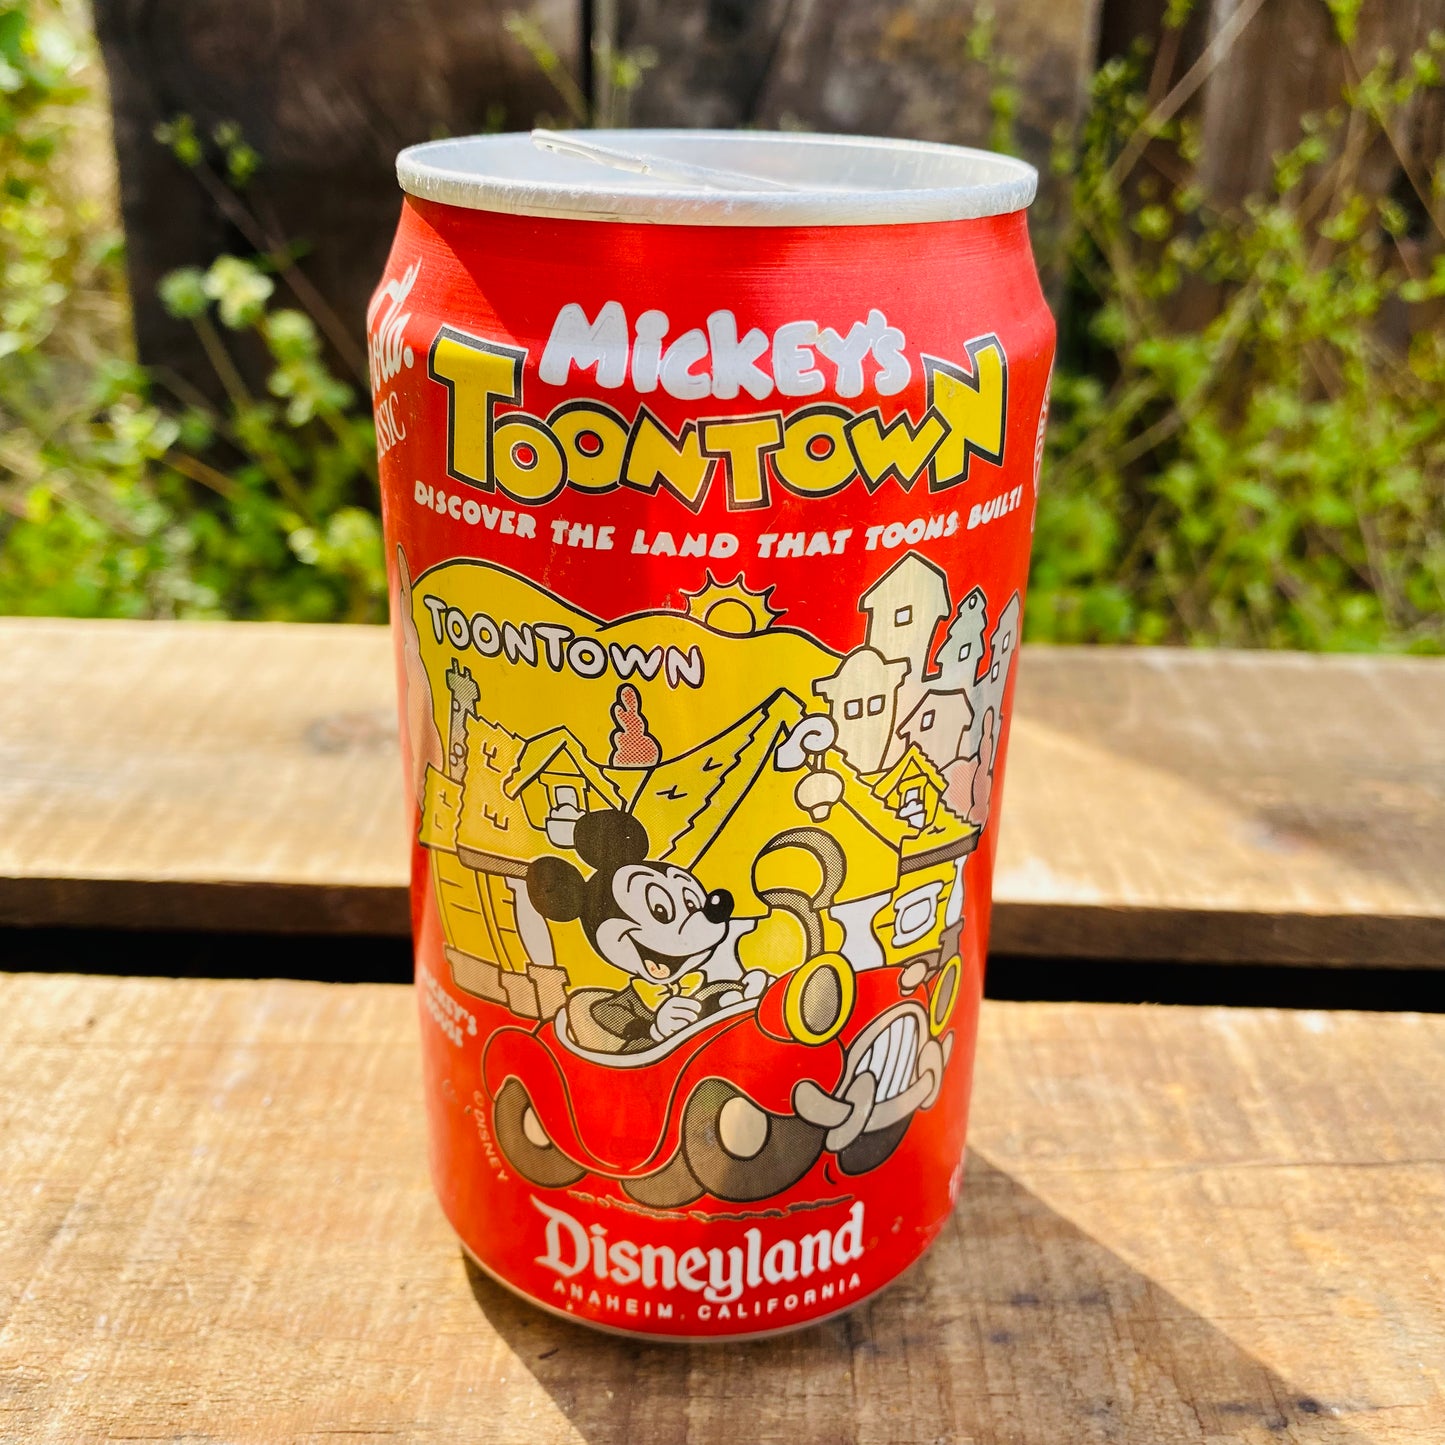 【1992 USA】 TOON TOWN コカコーラ 缶 ミッキー